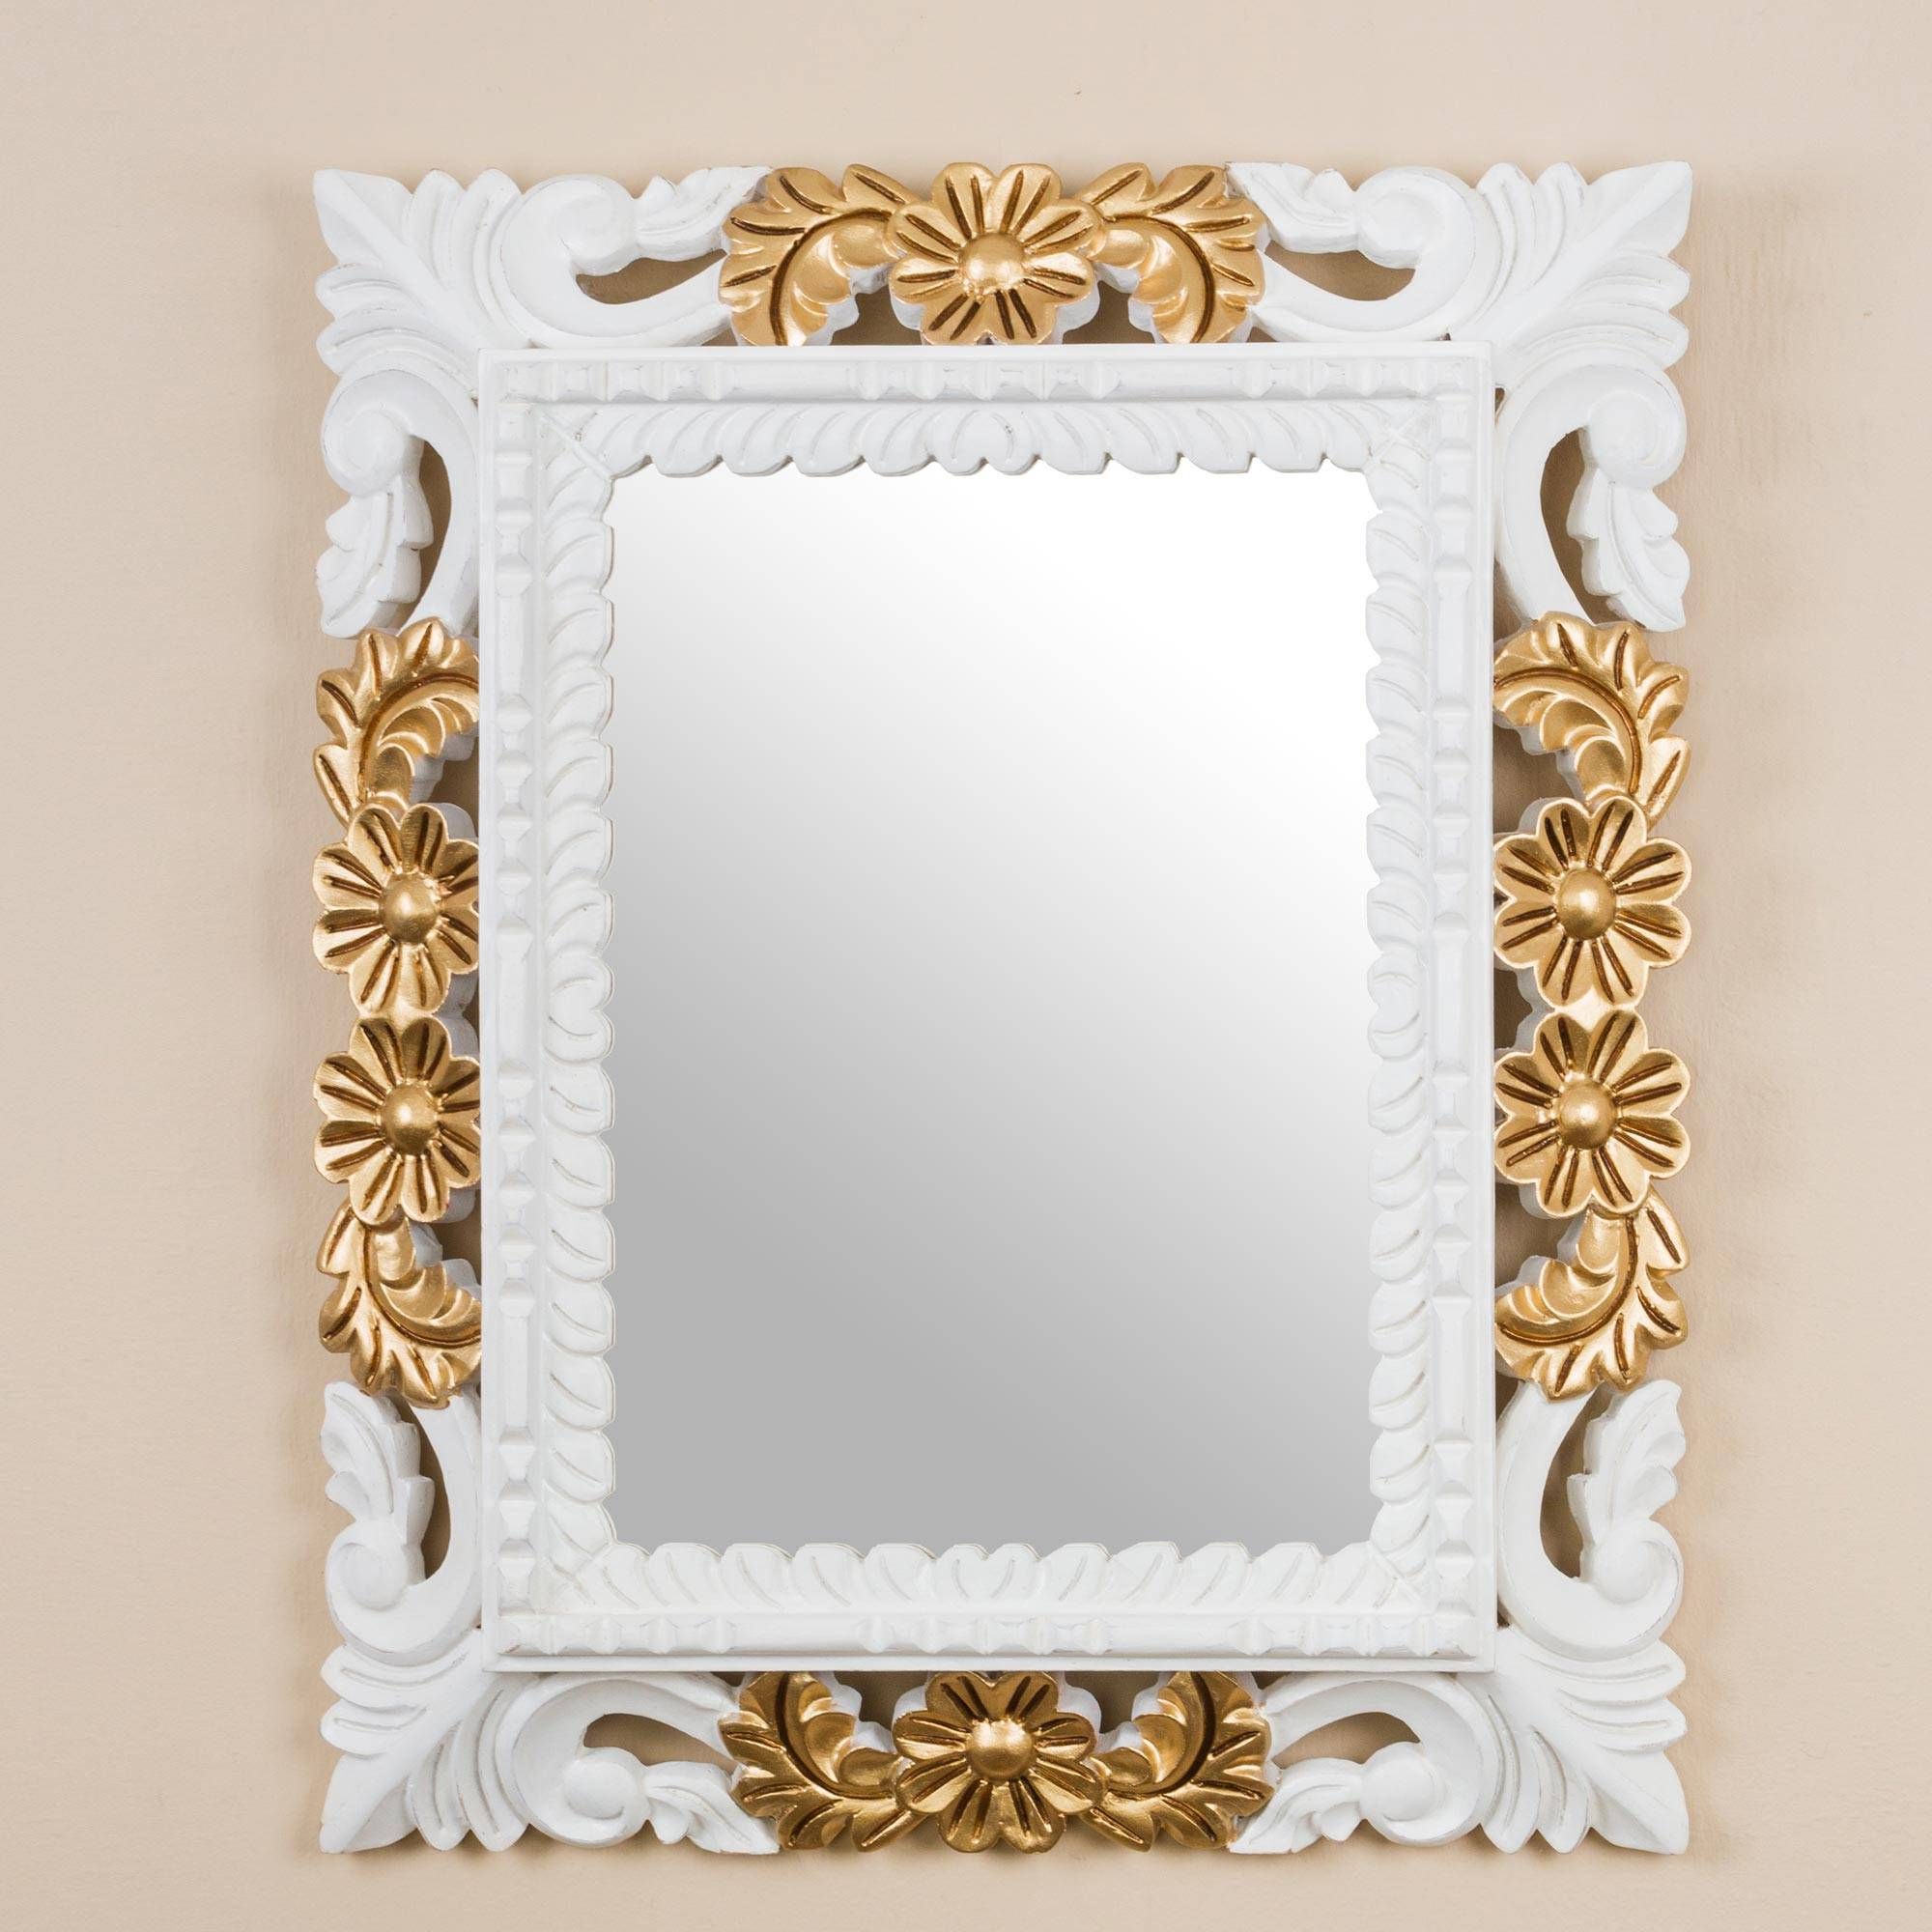 Most Current Princess Wall Mirrors Regarding Antiqued Rectangular Mohena Wood Wall Mirror From Peru, 'princess' (View 14 of 20)